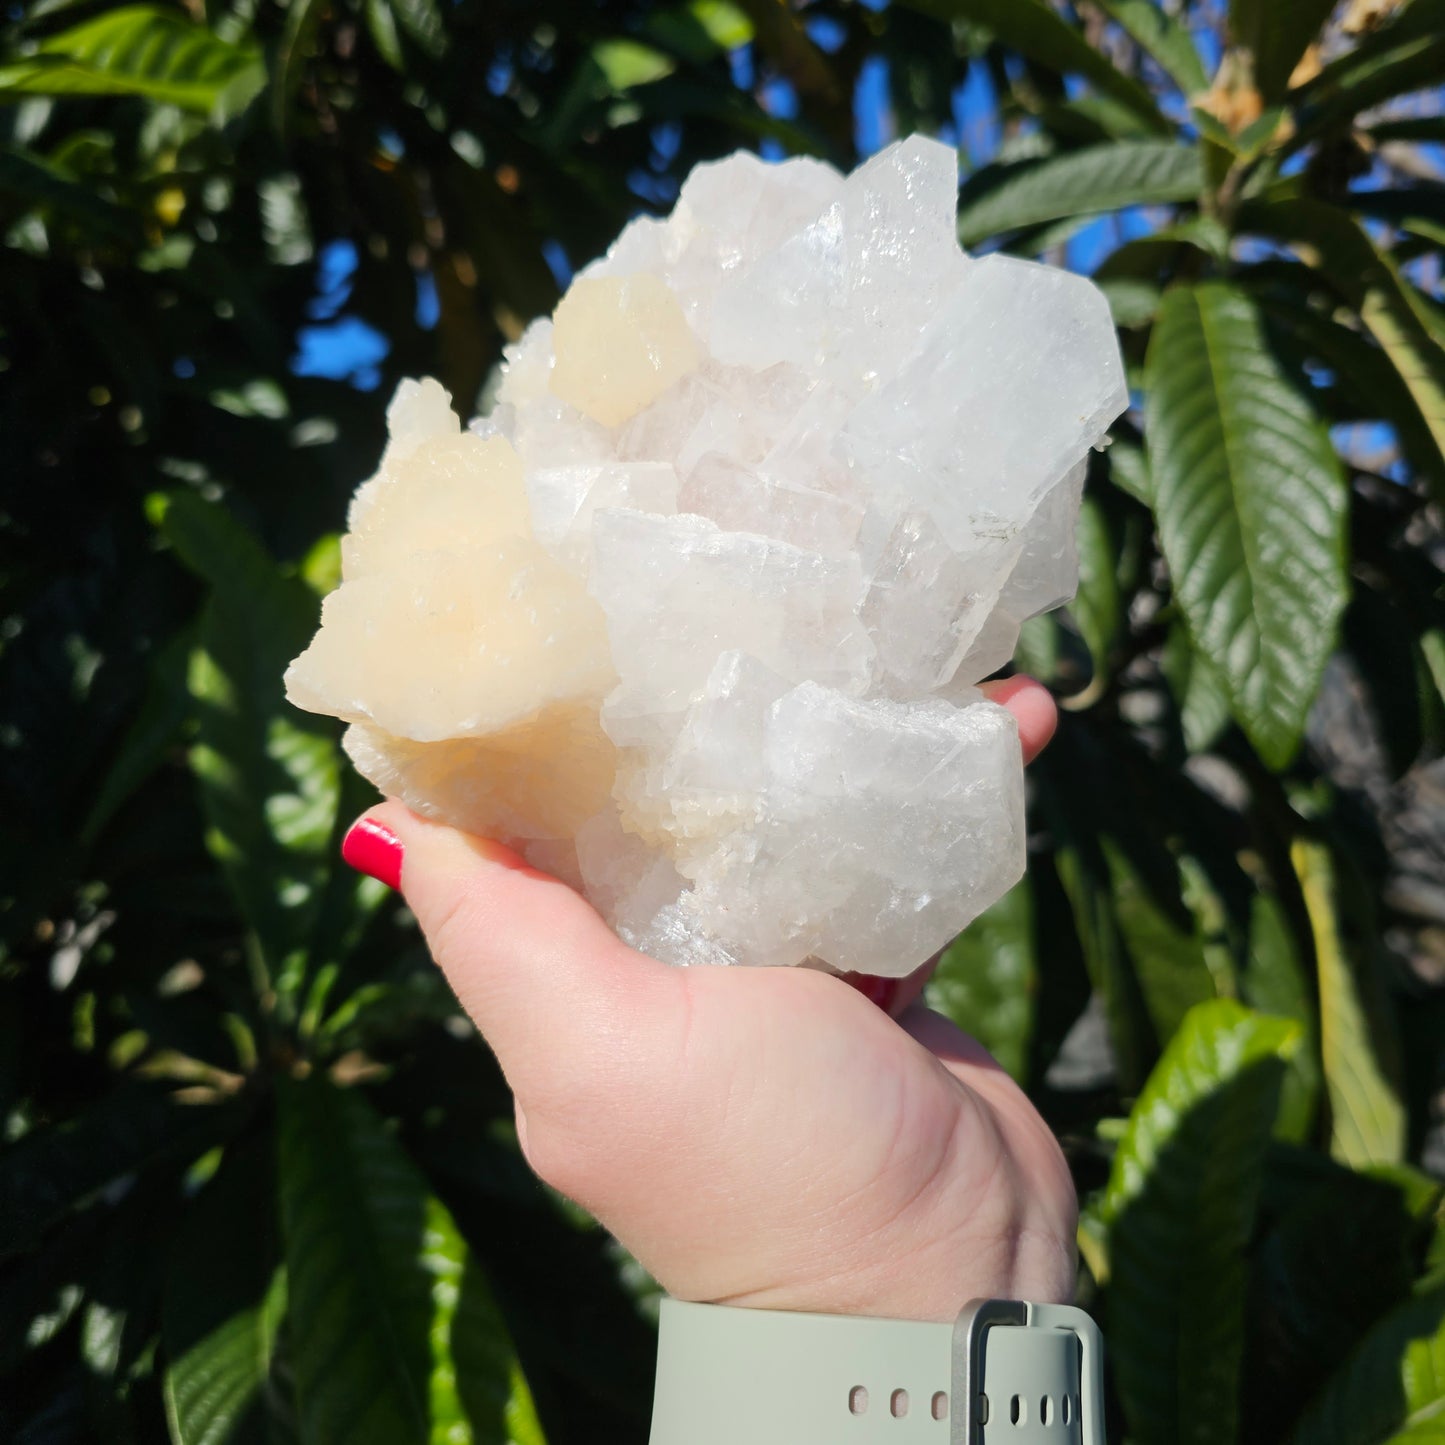 Apophyllite & Stilbite specimen with beautiful rainbows.  Approx. 7.5 x 13 x 12.5  Approx. 987g | Birthday Gifts, Anniversary Gifts, Valentine's Day, Christmas, Easter, Eid, Mother's Day, Diwali, Hannukah, Women's, Girl's, Gifts for her, Gifts for Girlfriend, Gifts for Mom, Gifts for Mum, Gifts for Friend, Handmade Gifts, Handmade Jewelry, New Year's Eve, Graduation, Boho, Hippie, Minimalist, Gemstone, Crystal, Crystal Healing